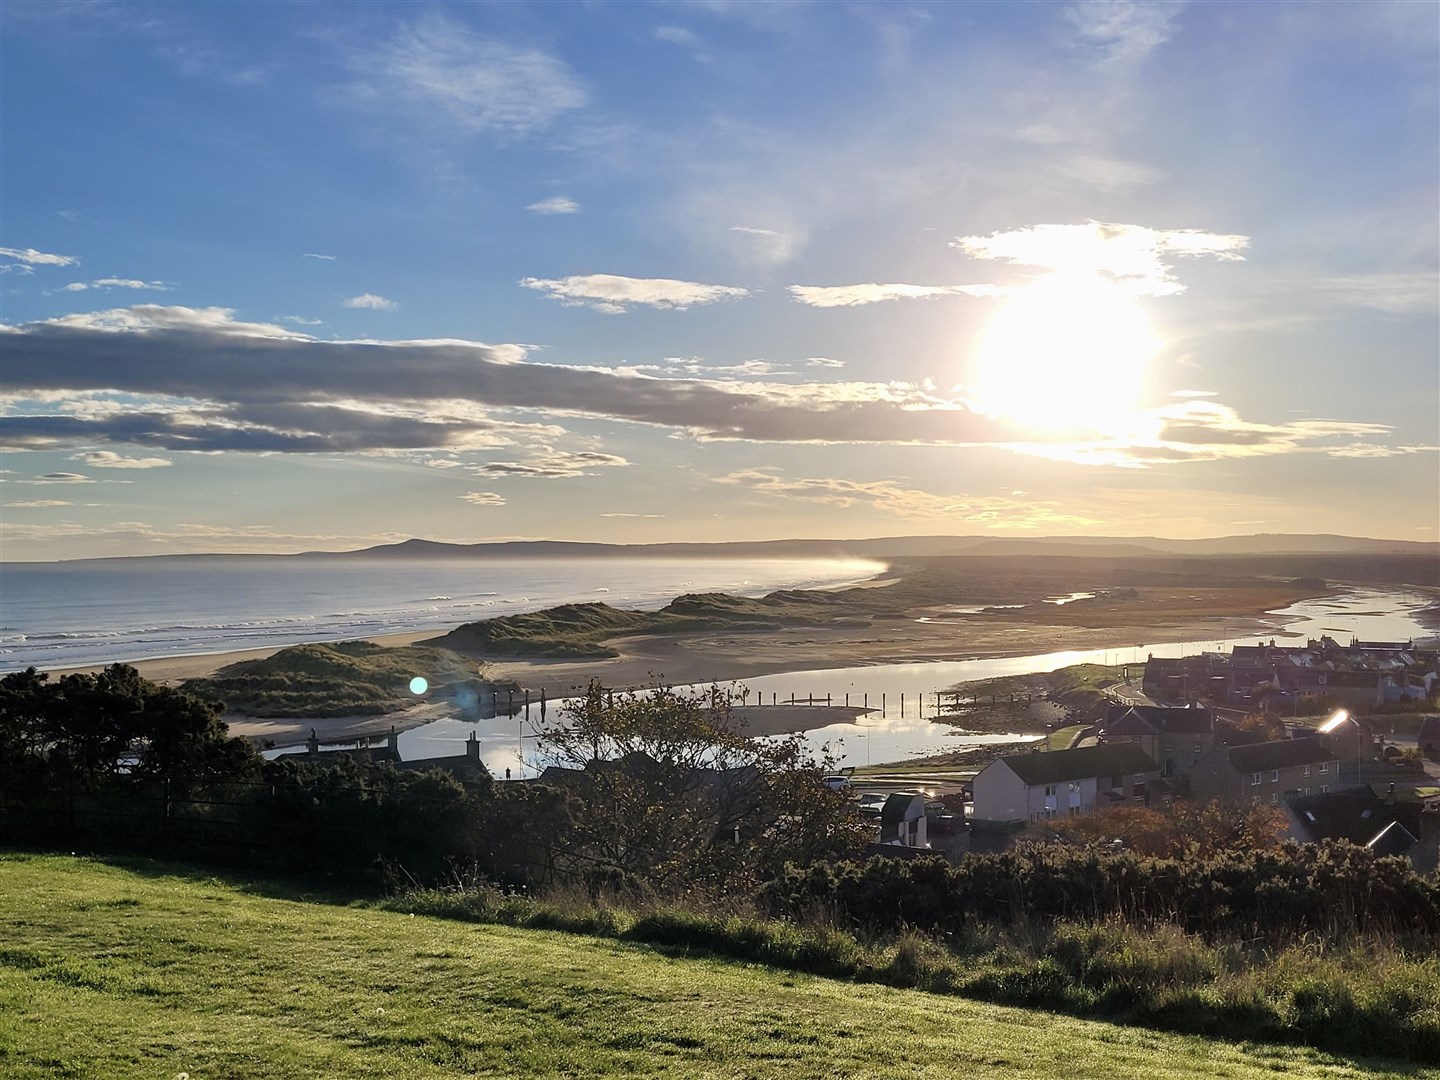 Reader Hazel Thomson enjoyed a trip to Lossiemouth, where she snapped these photographs.